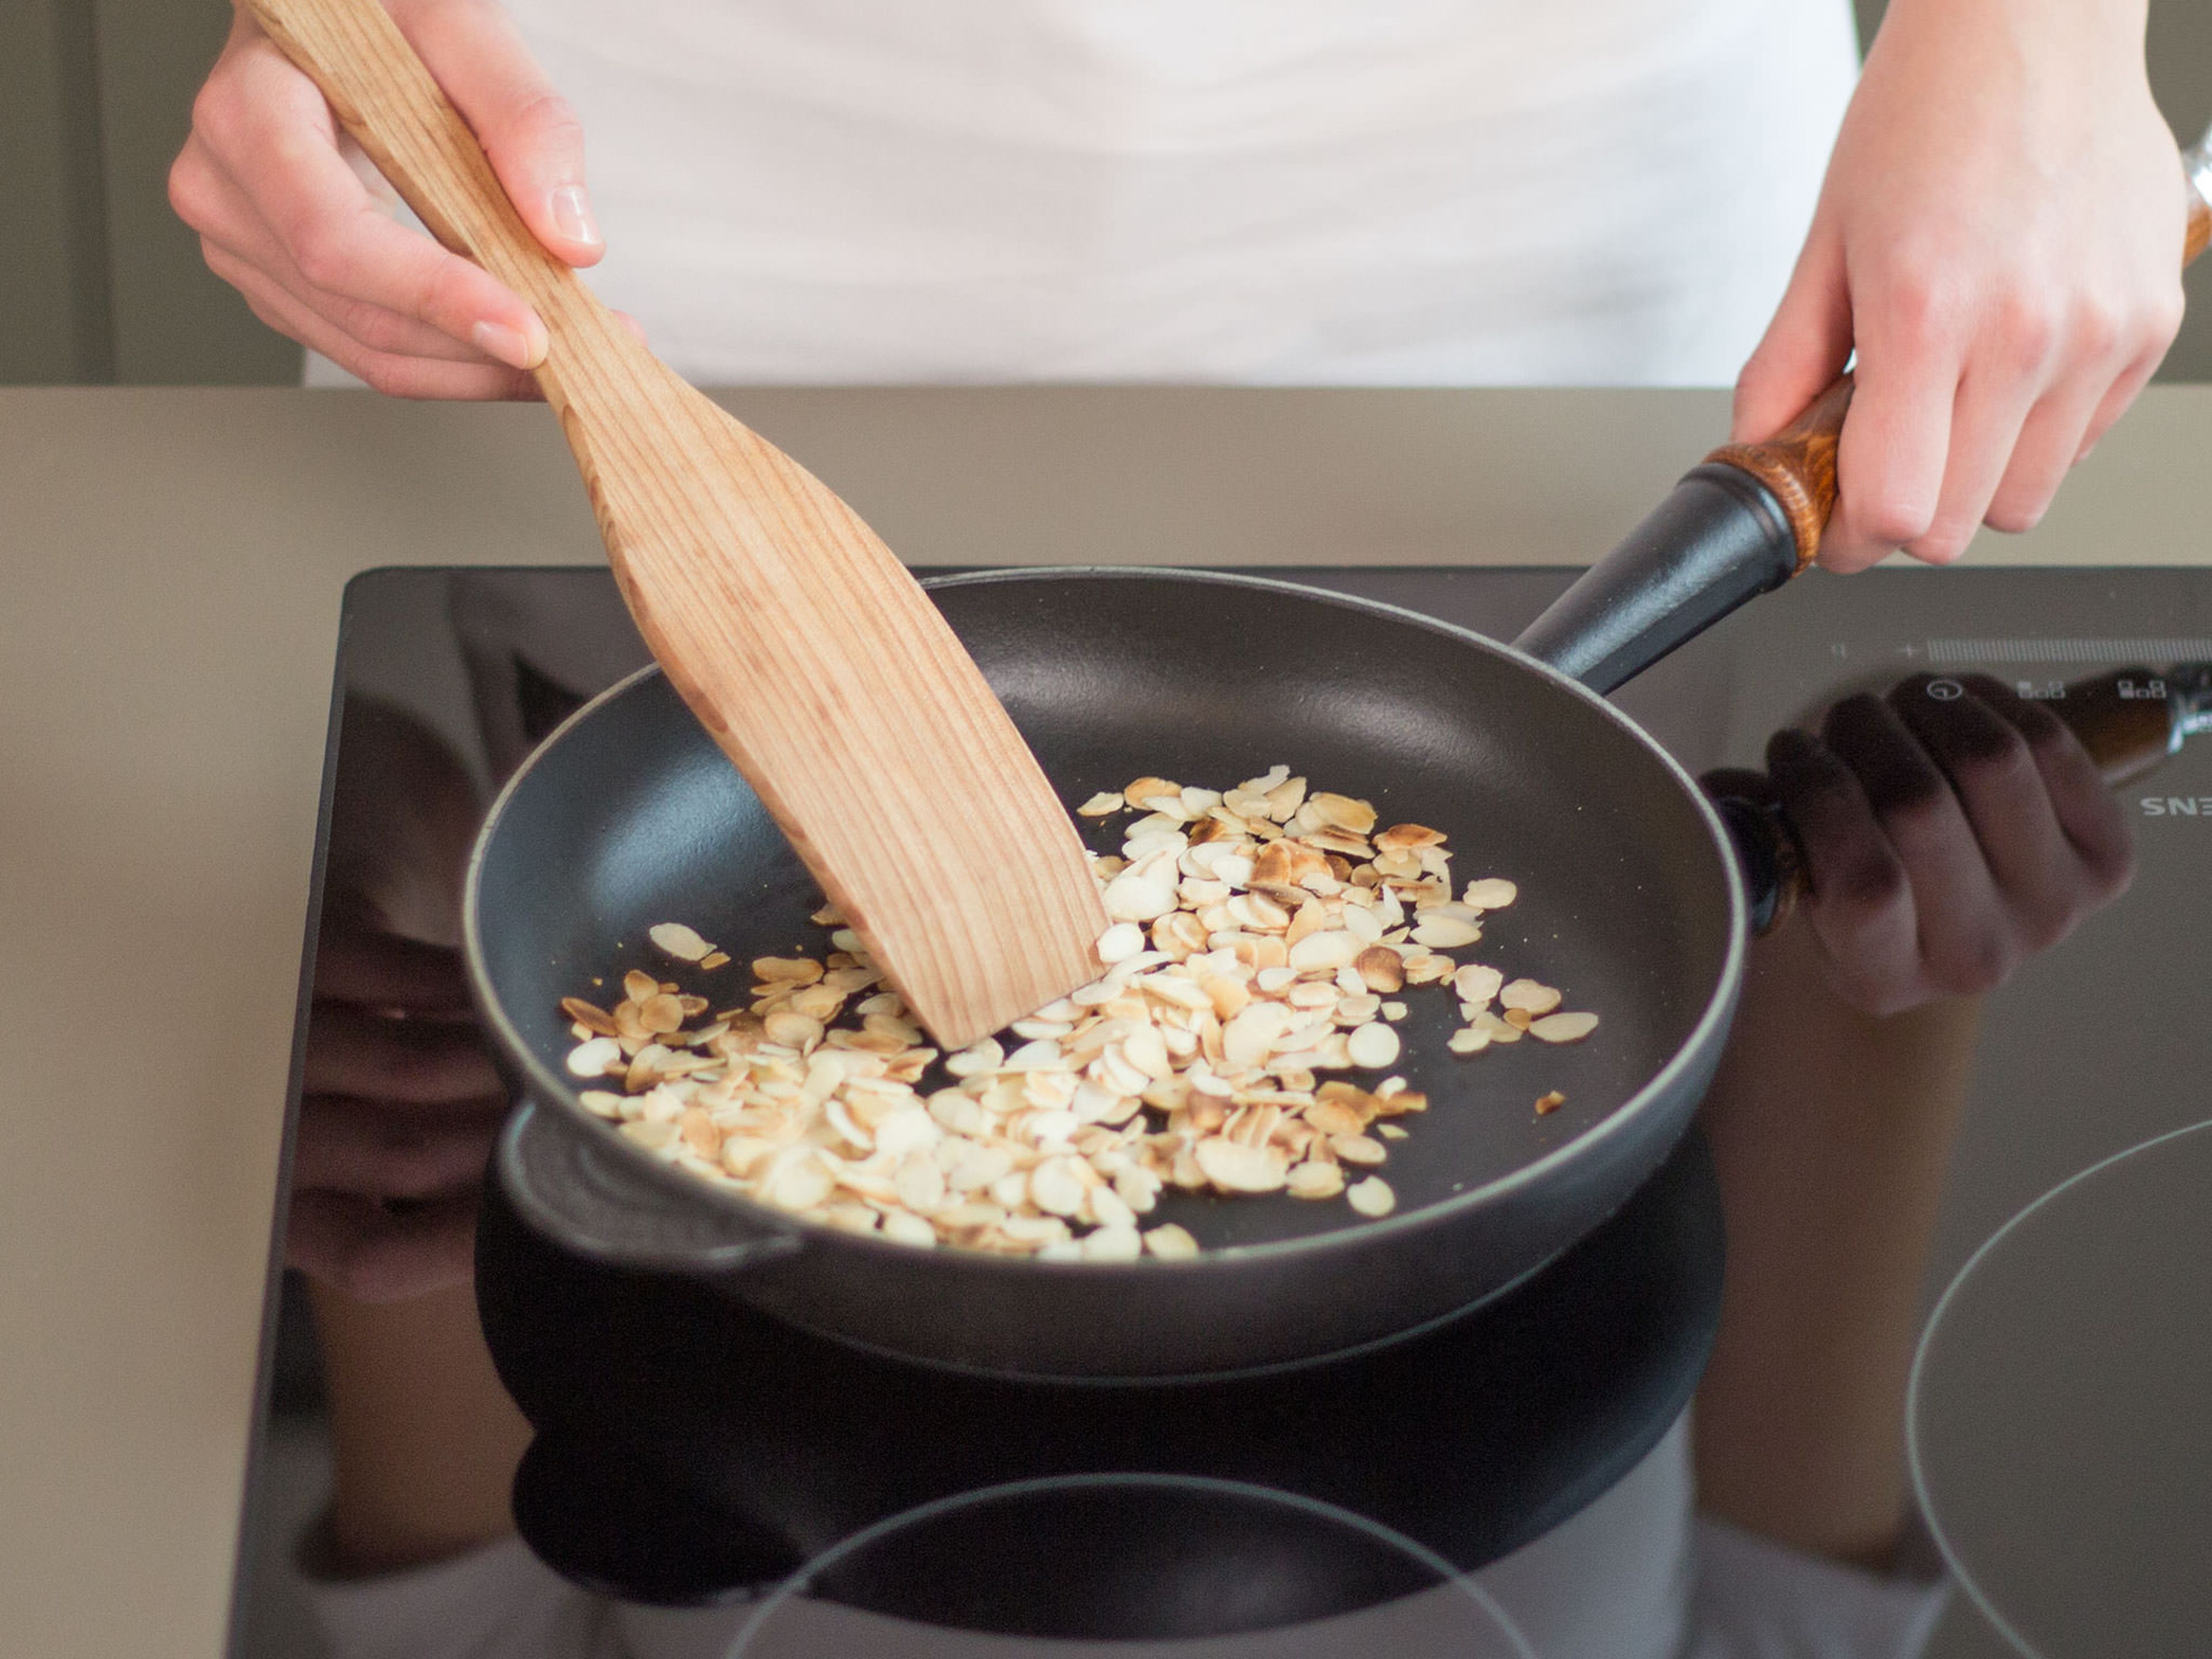 In a large, grease-free saucepan, toast almonds over medium heat for approx. 1 – 2 min. until golden brown and fragrant.